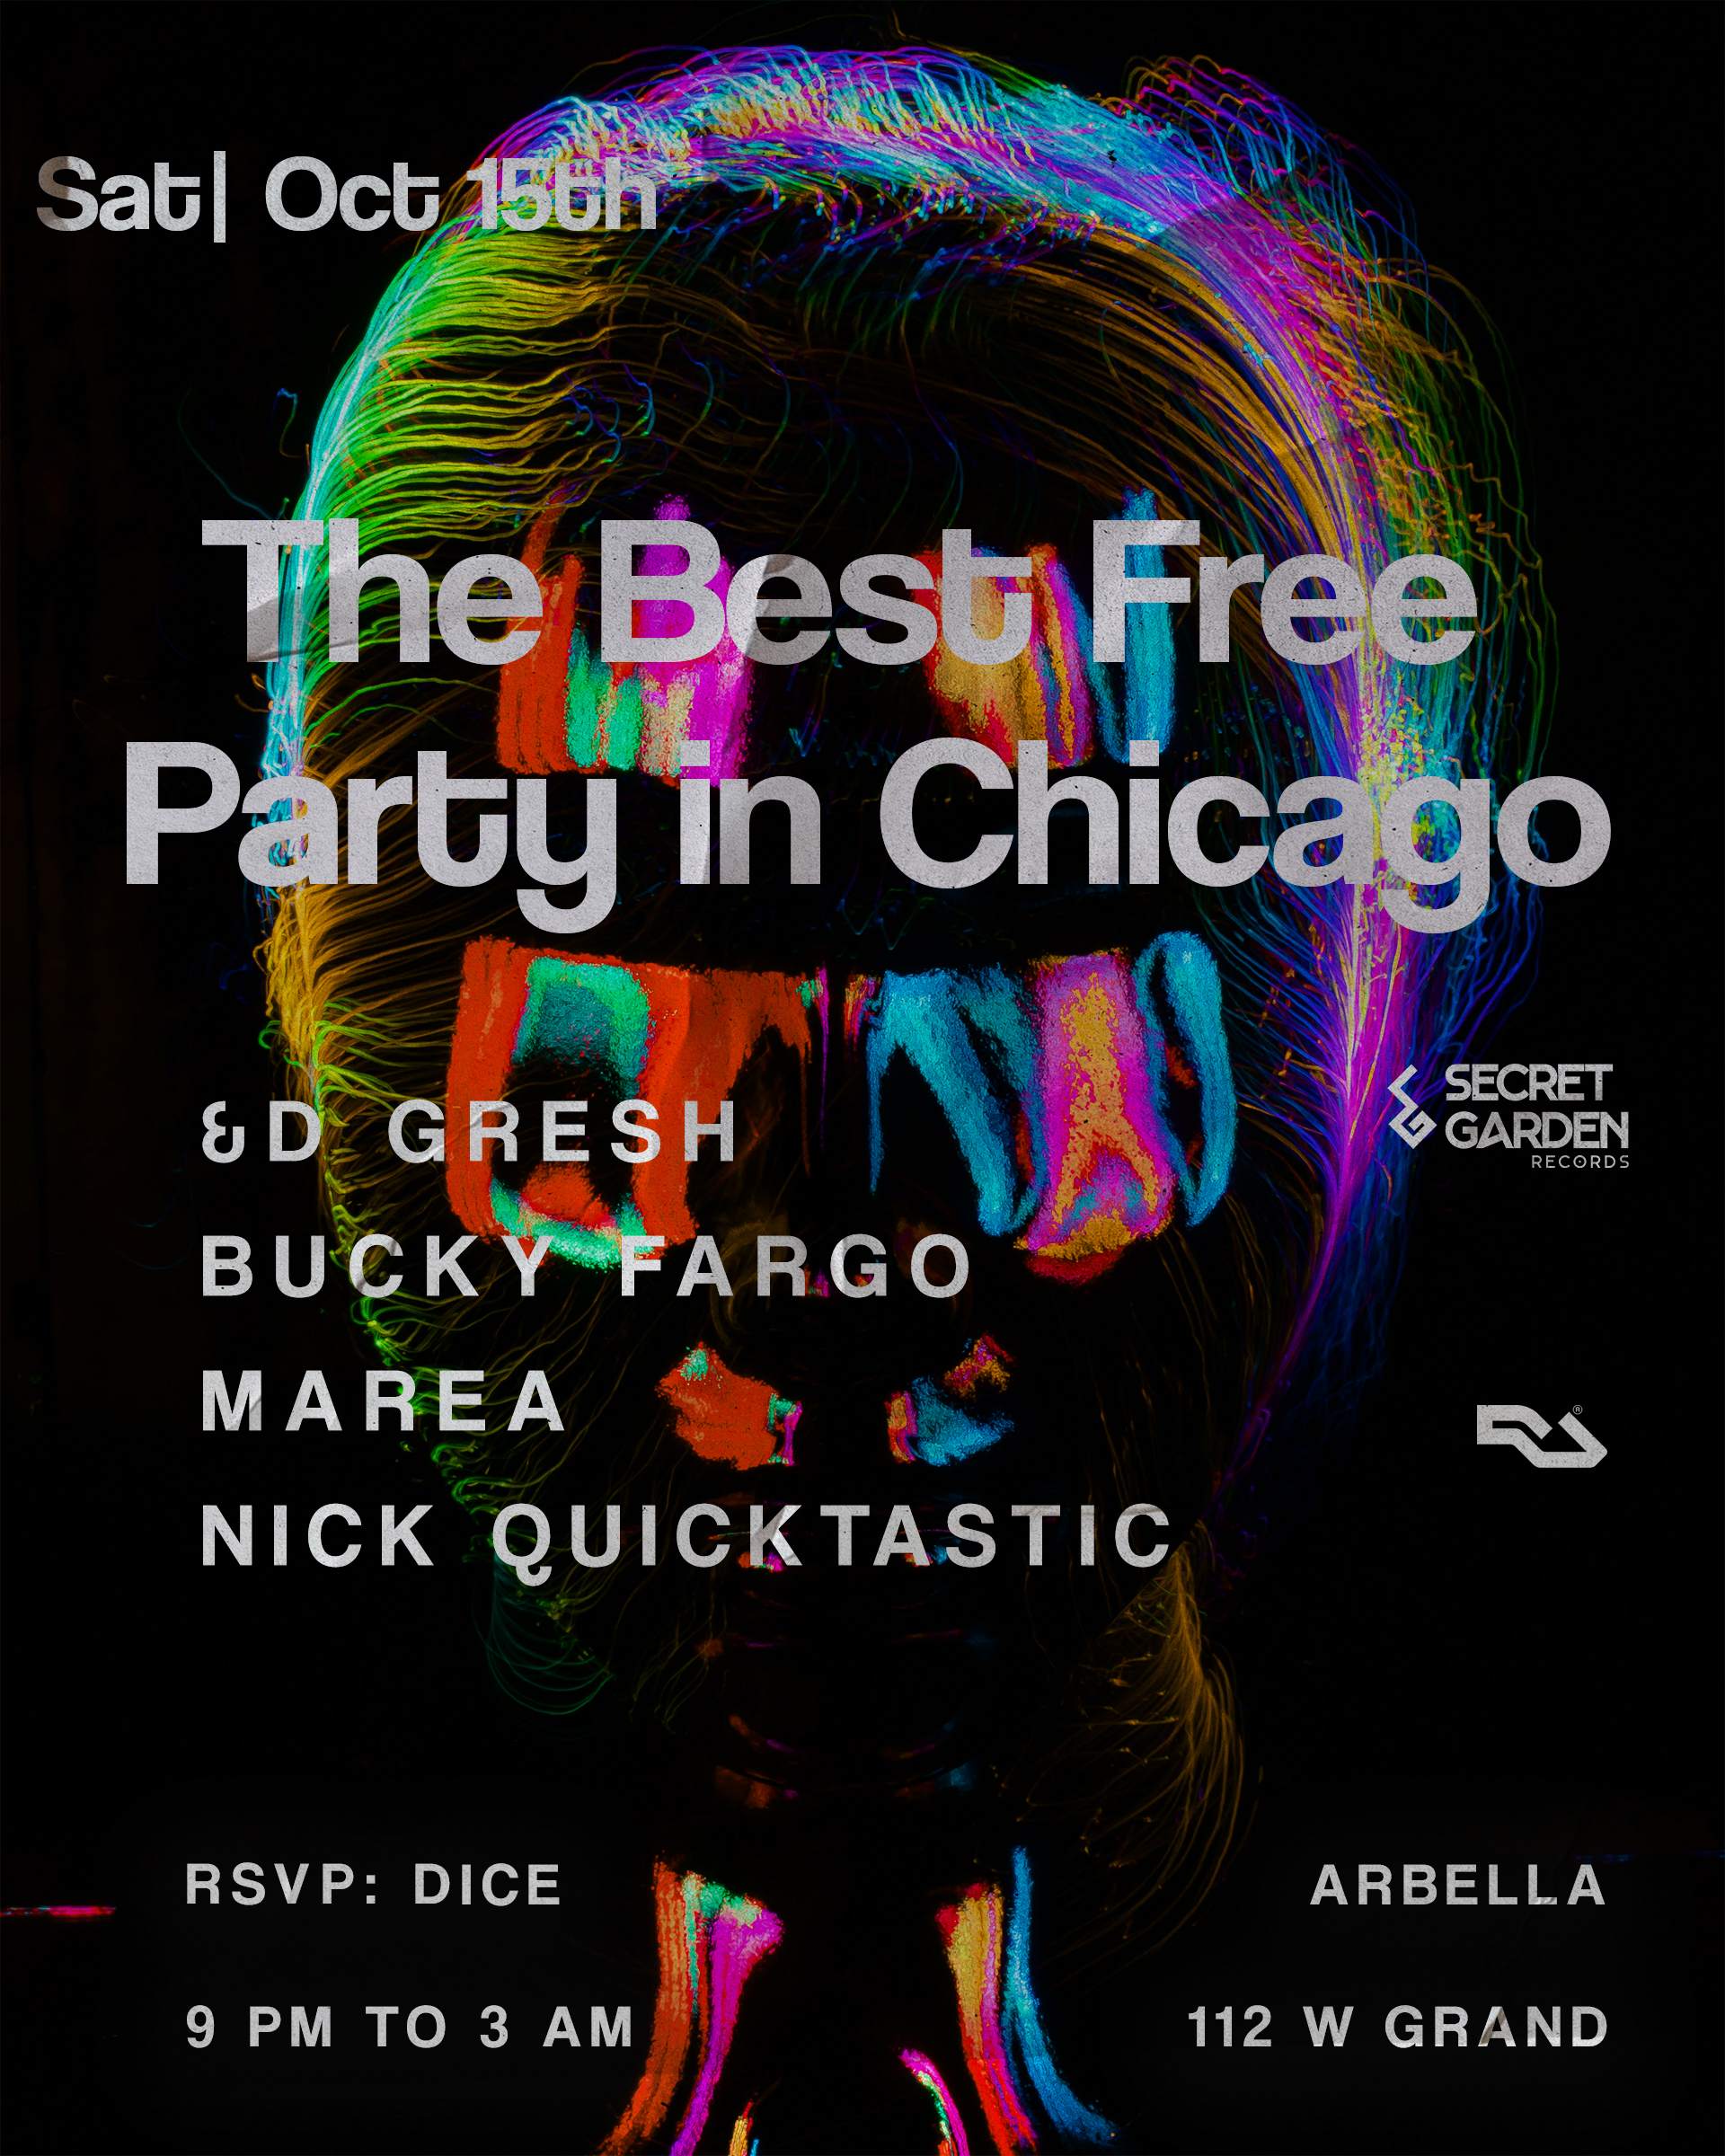 &D, Bucky Fargo, Marea, & Quicktastic present the Best Free Party in Chicago - Página frontal